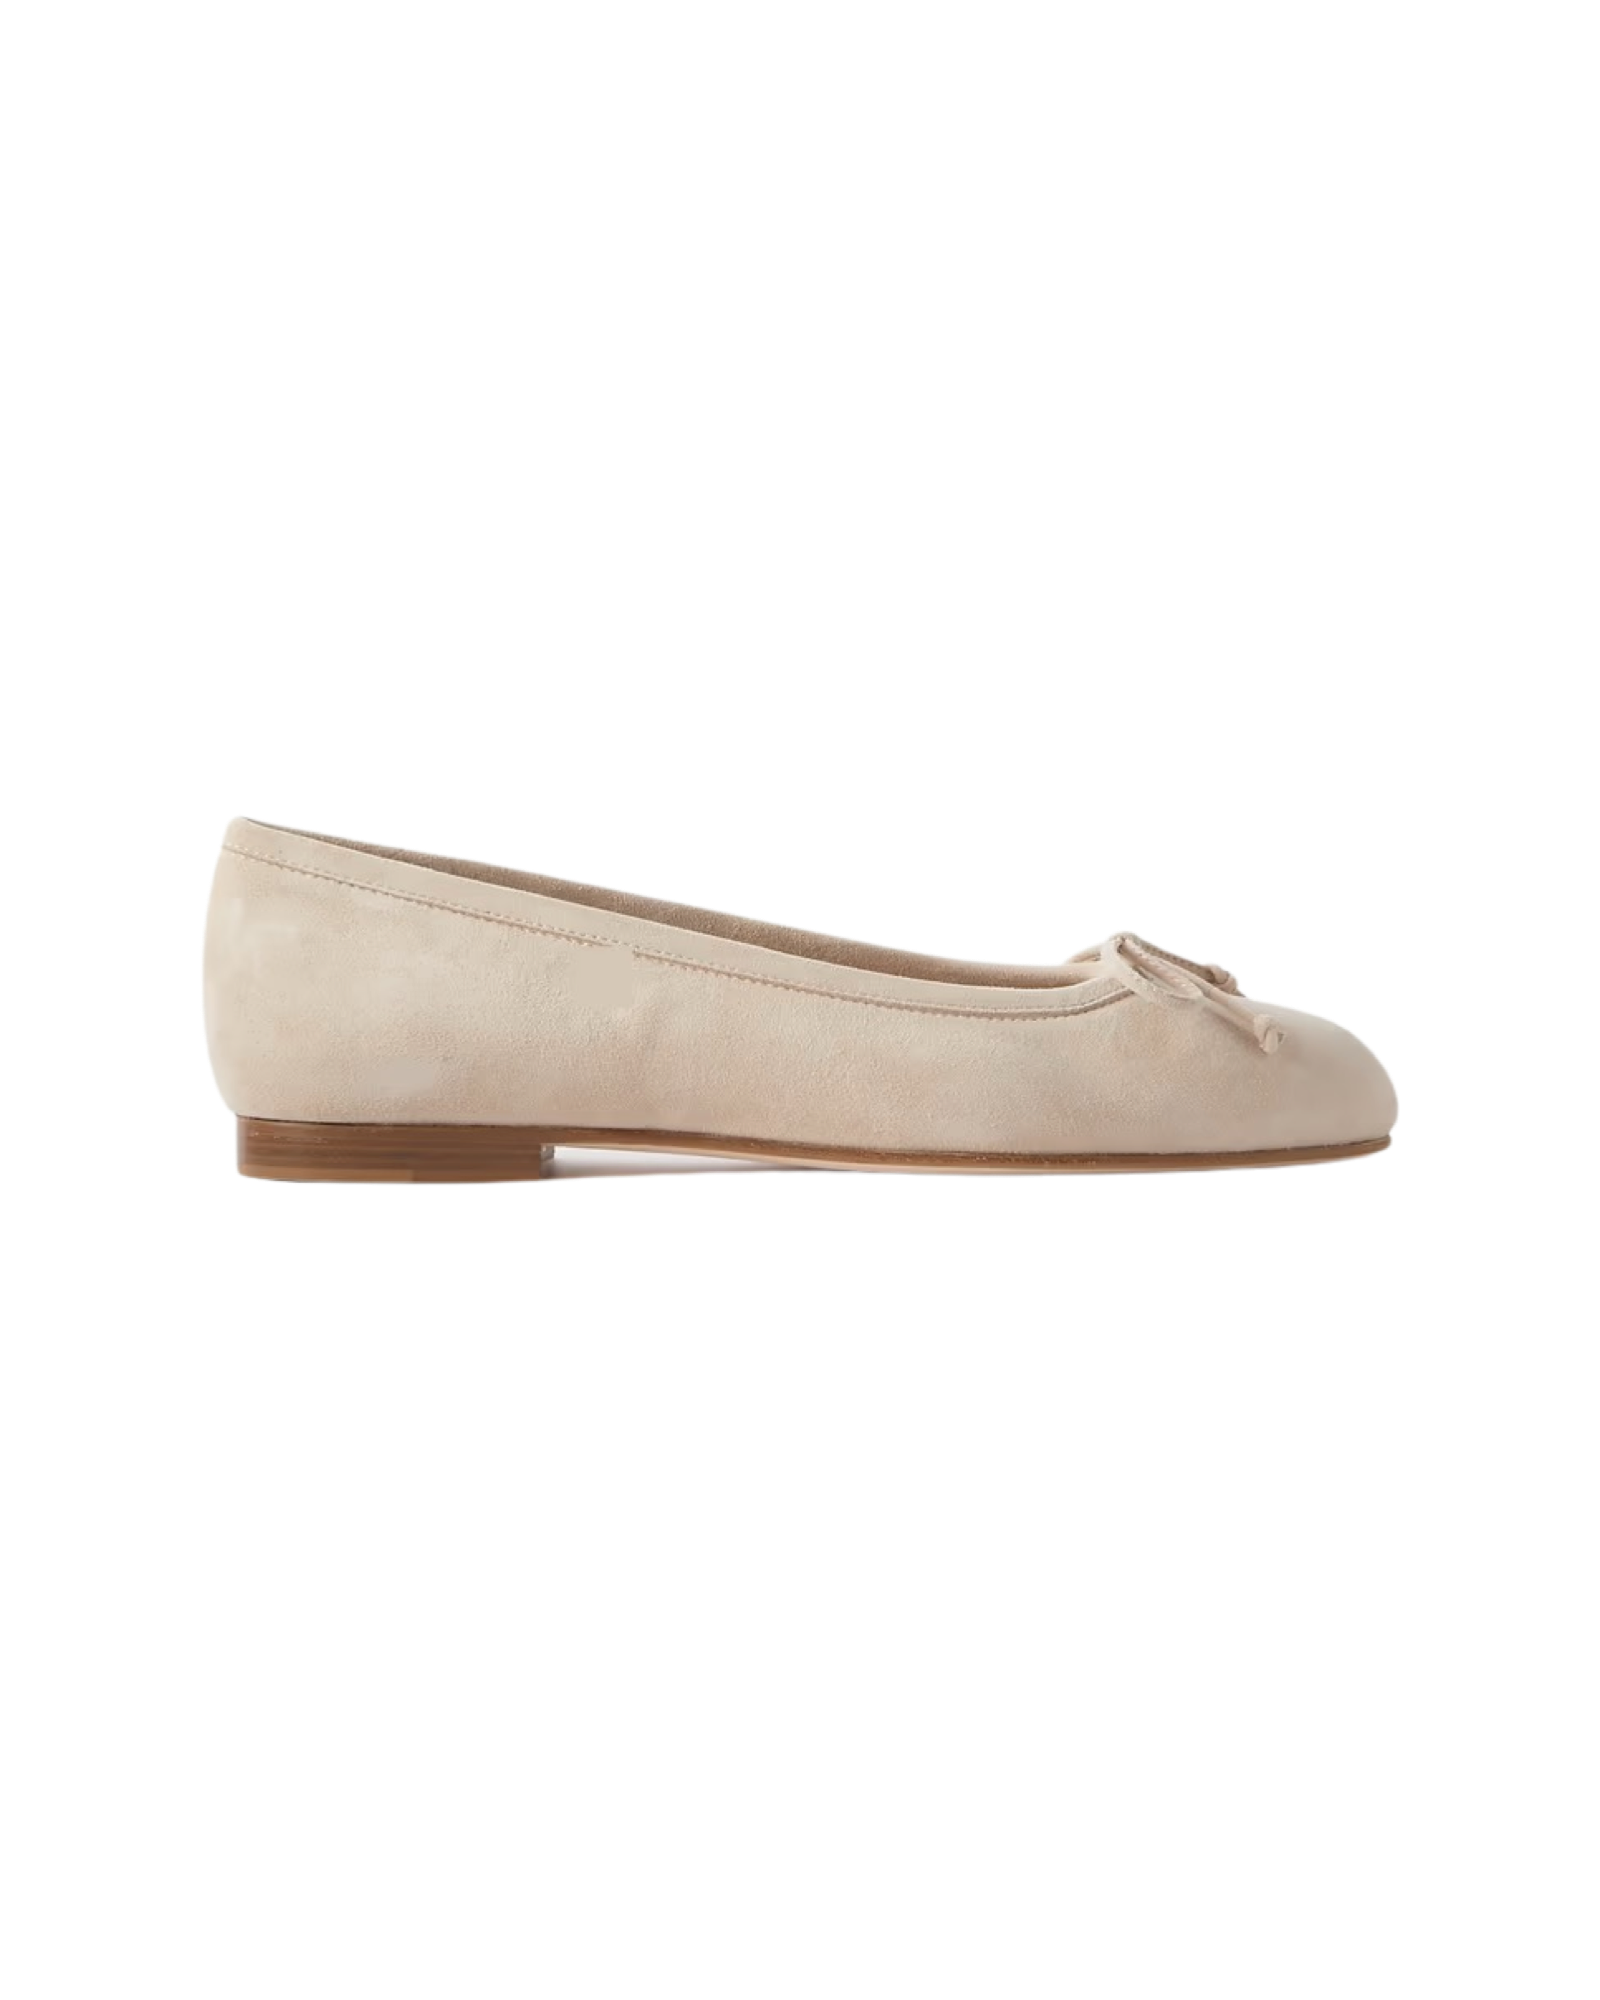 Veralli bow-detailed suede ballet flats